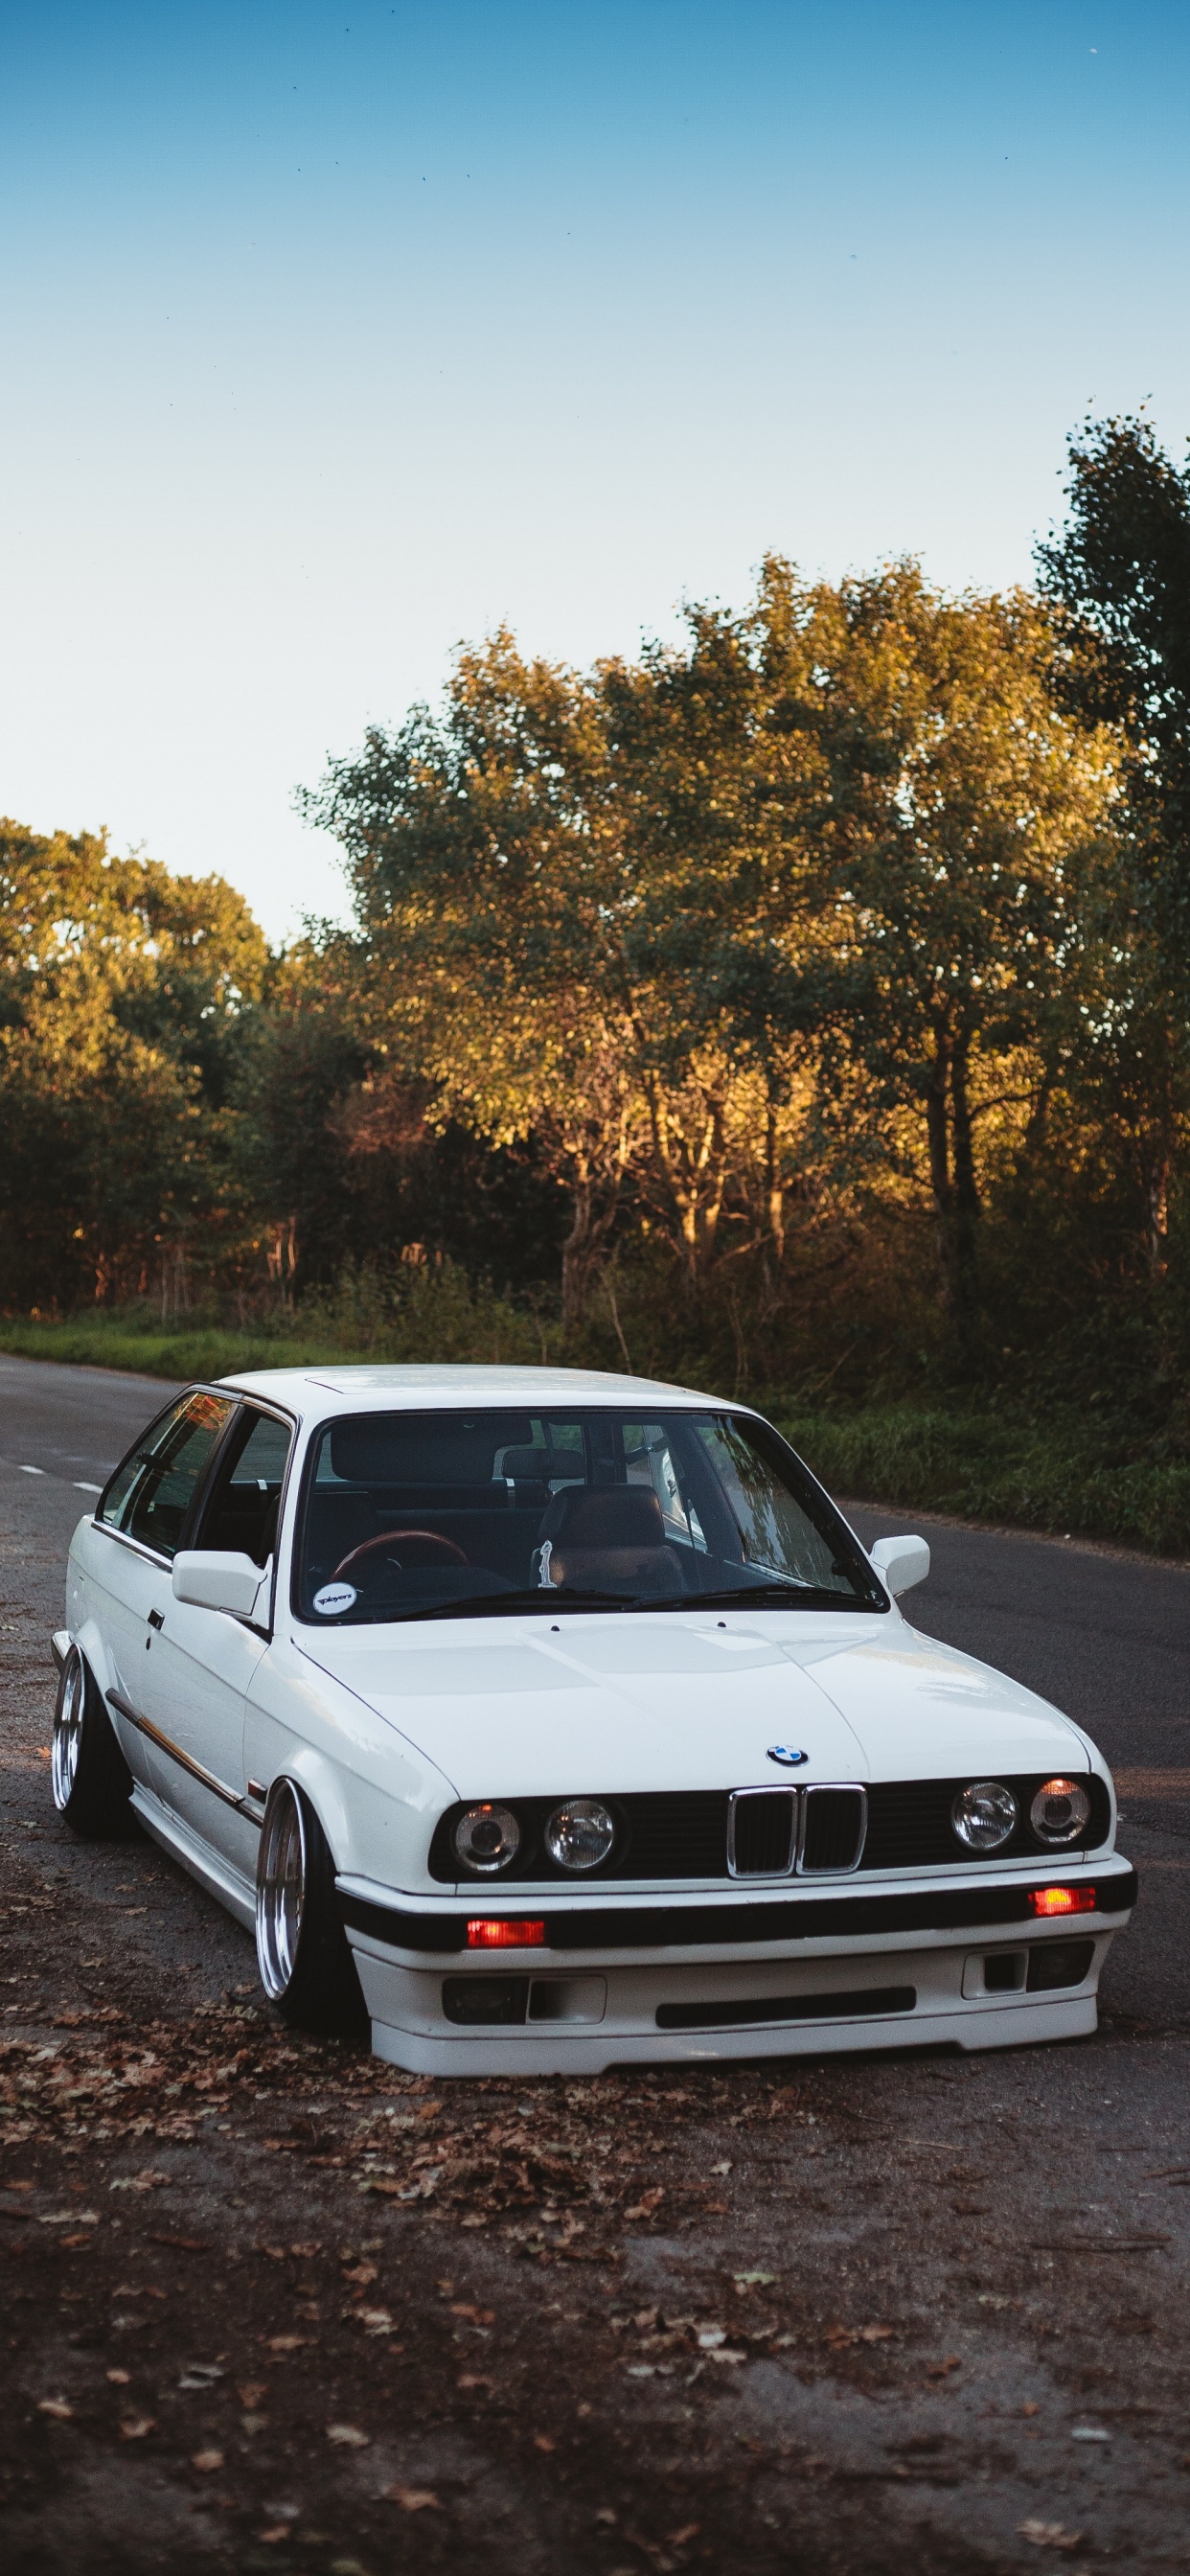 White Bmw m 3 on Road During Daytime. Wallpaper in 1242x2688 Resolution